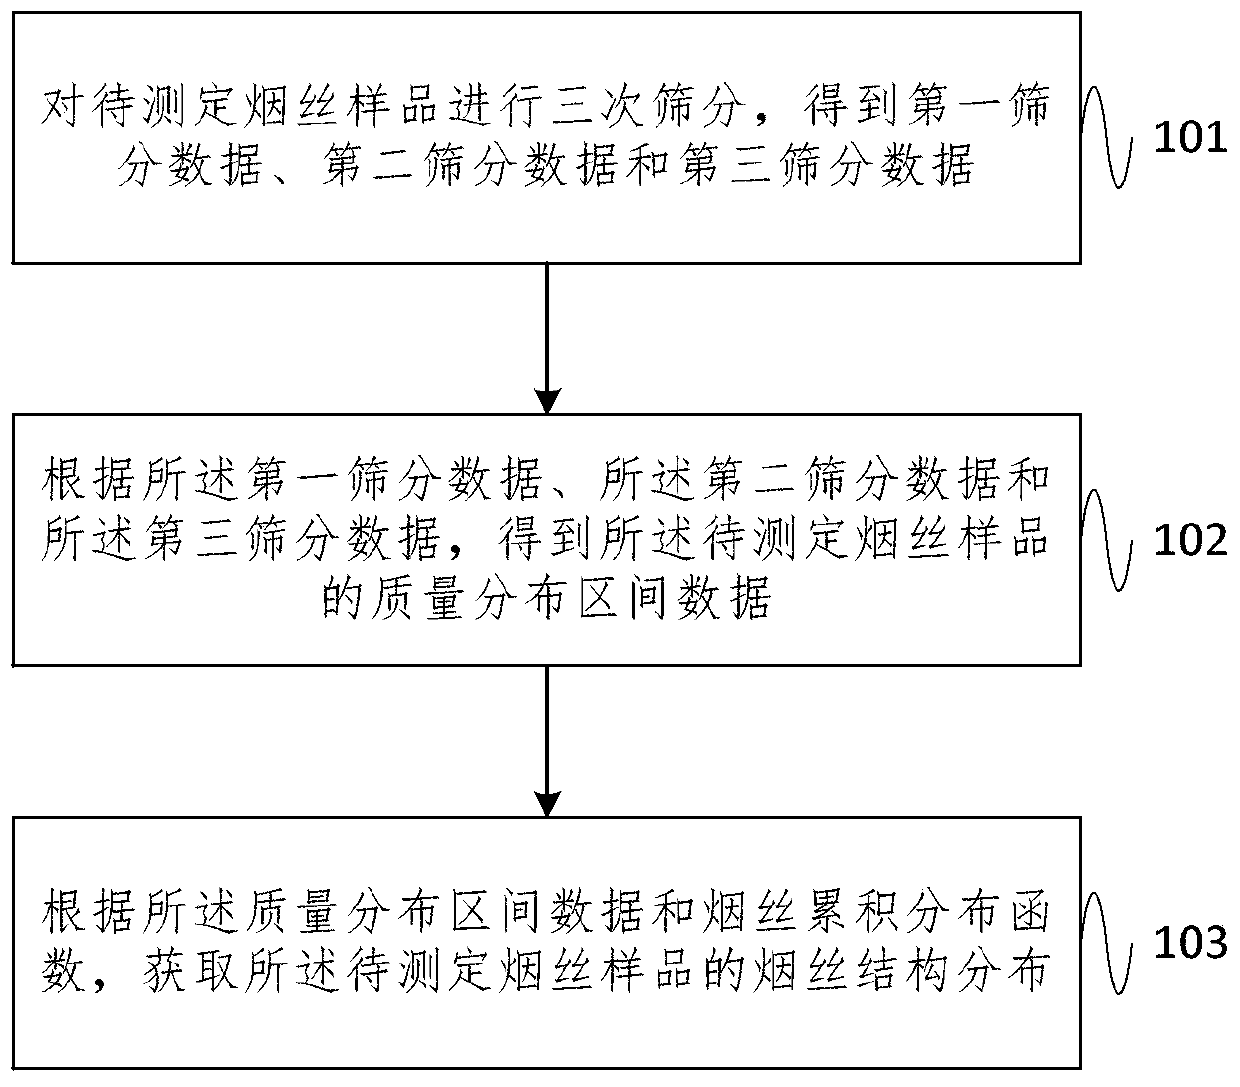 Cut tobacco screening instrument and cut tobacco structure distribution measuring method